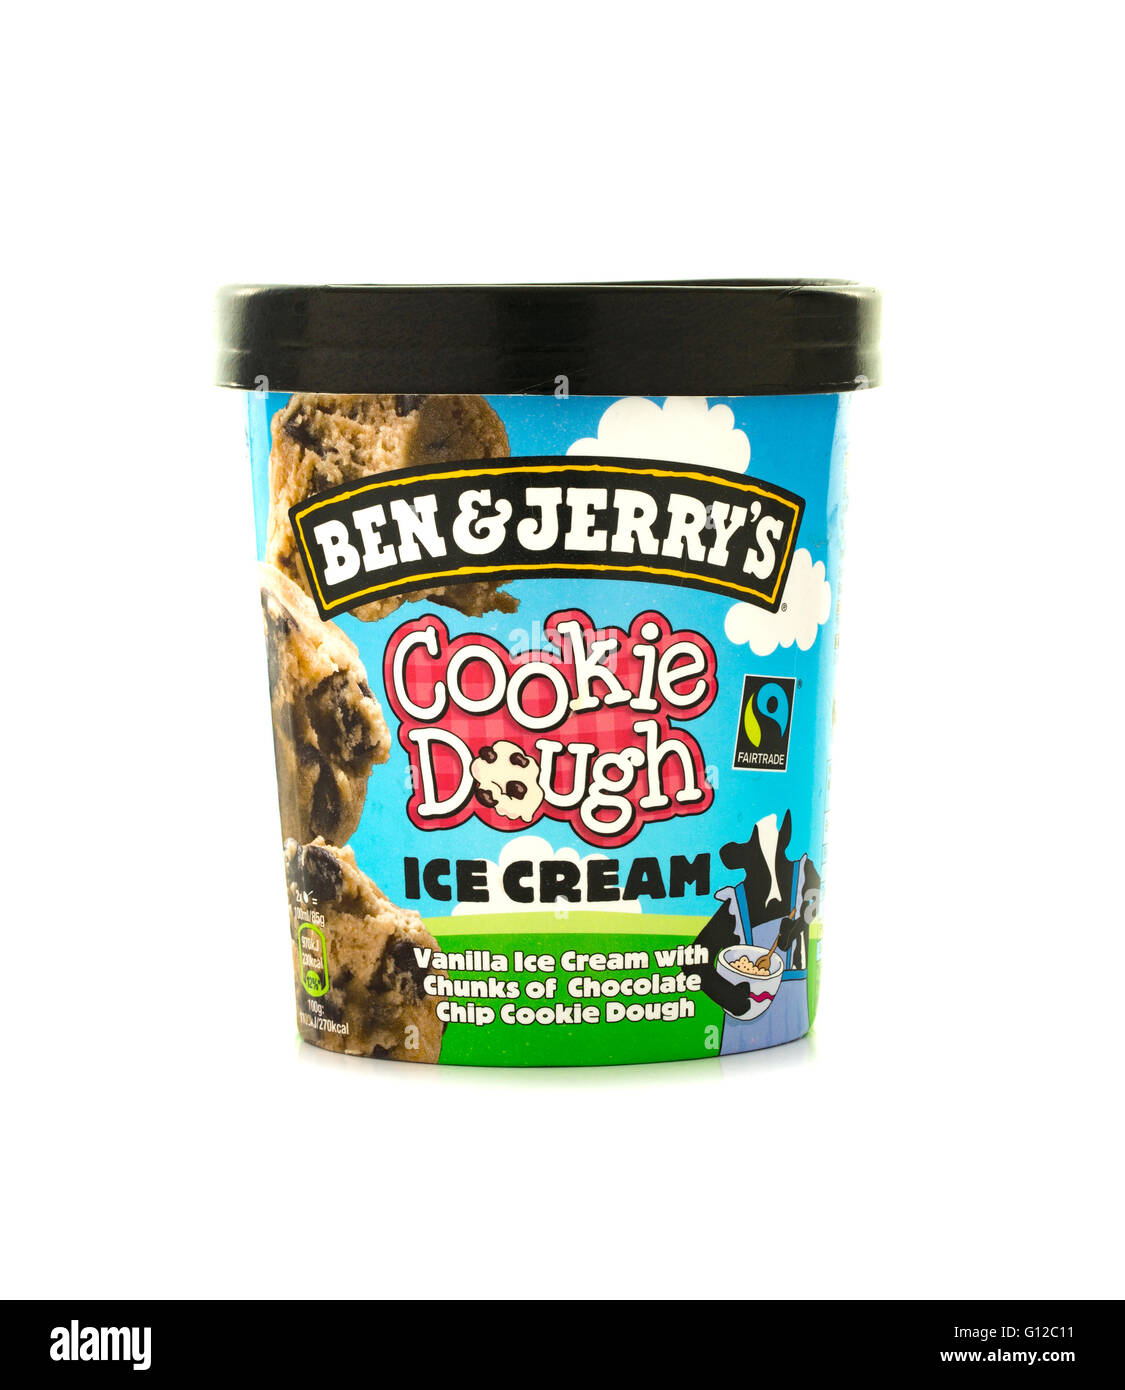 Ben & Jerry's cookie dough ice cream on a white background Stock Photo